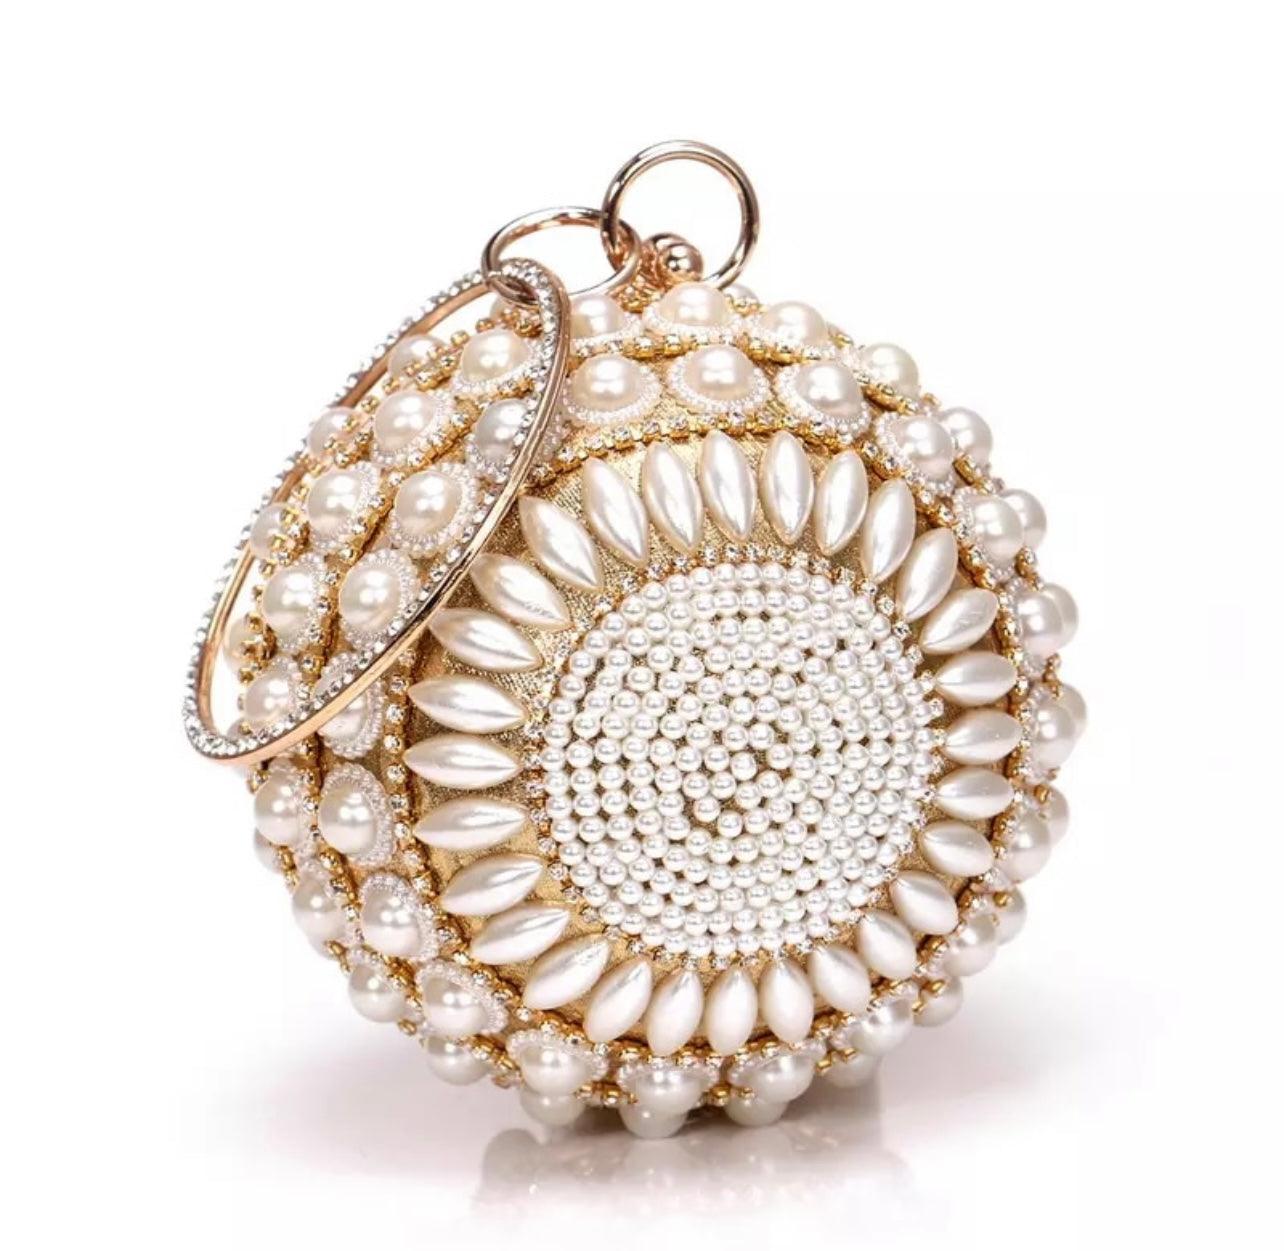 OutDazl - Circular Wristlet Clutch in Pearl & Gold - OutDazl